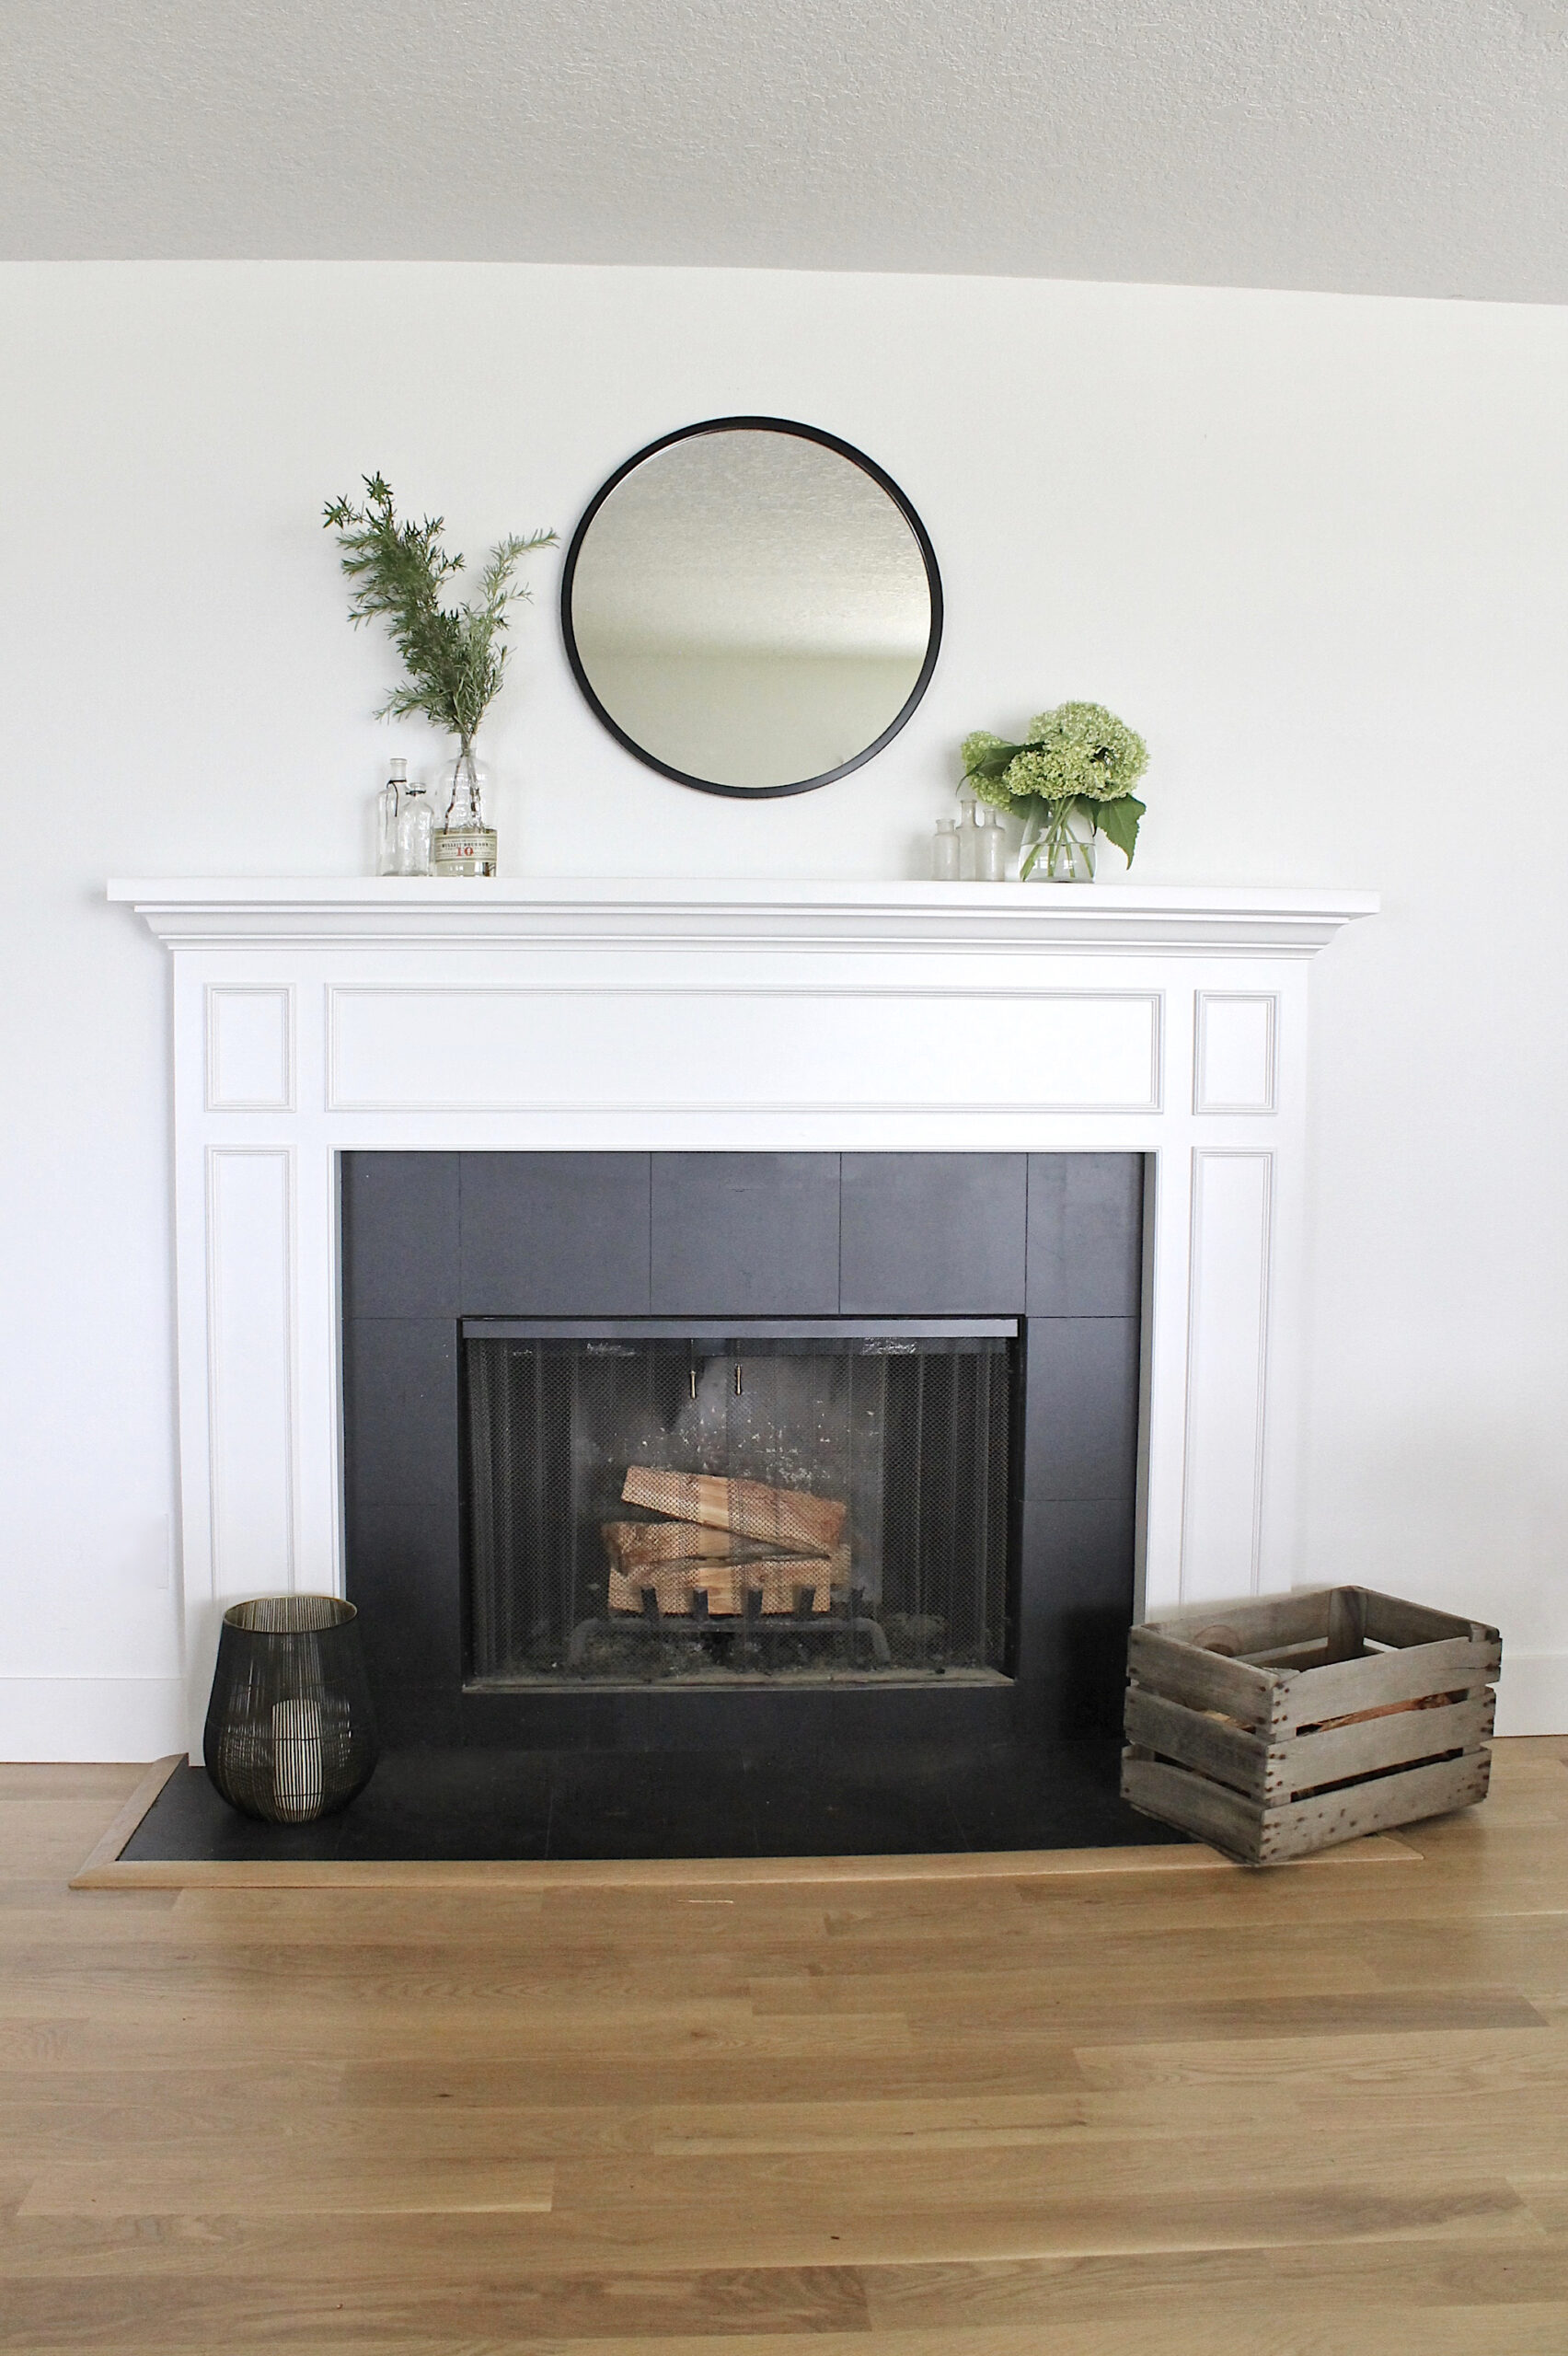 How To Paint A Ceramic Tile Fireplace, How To Tile Around Fireplace